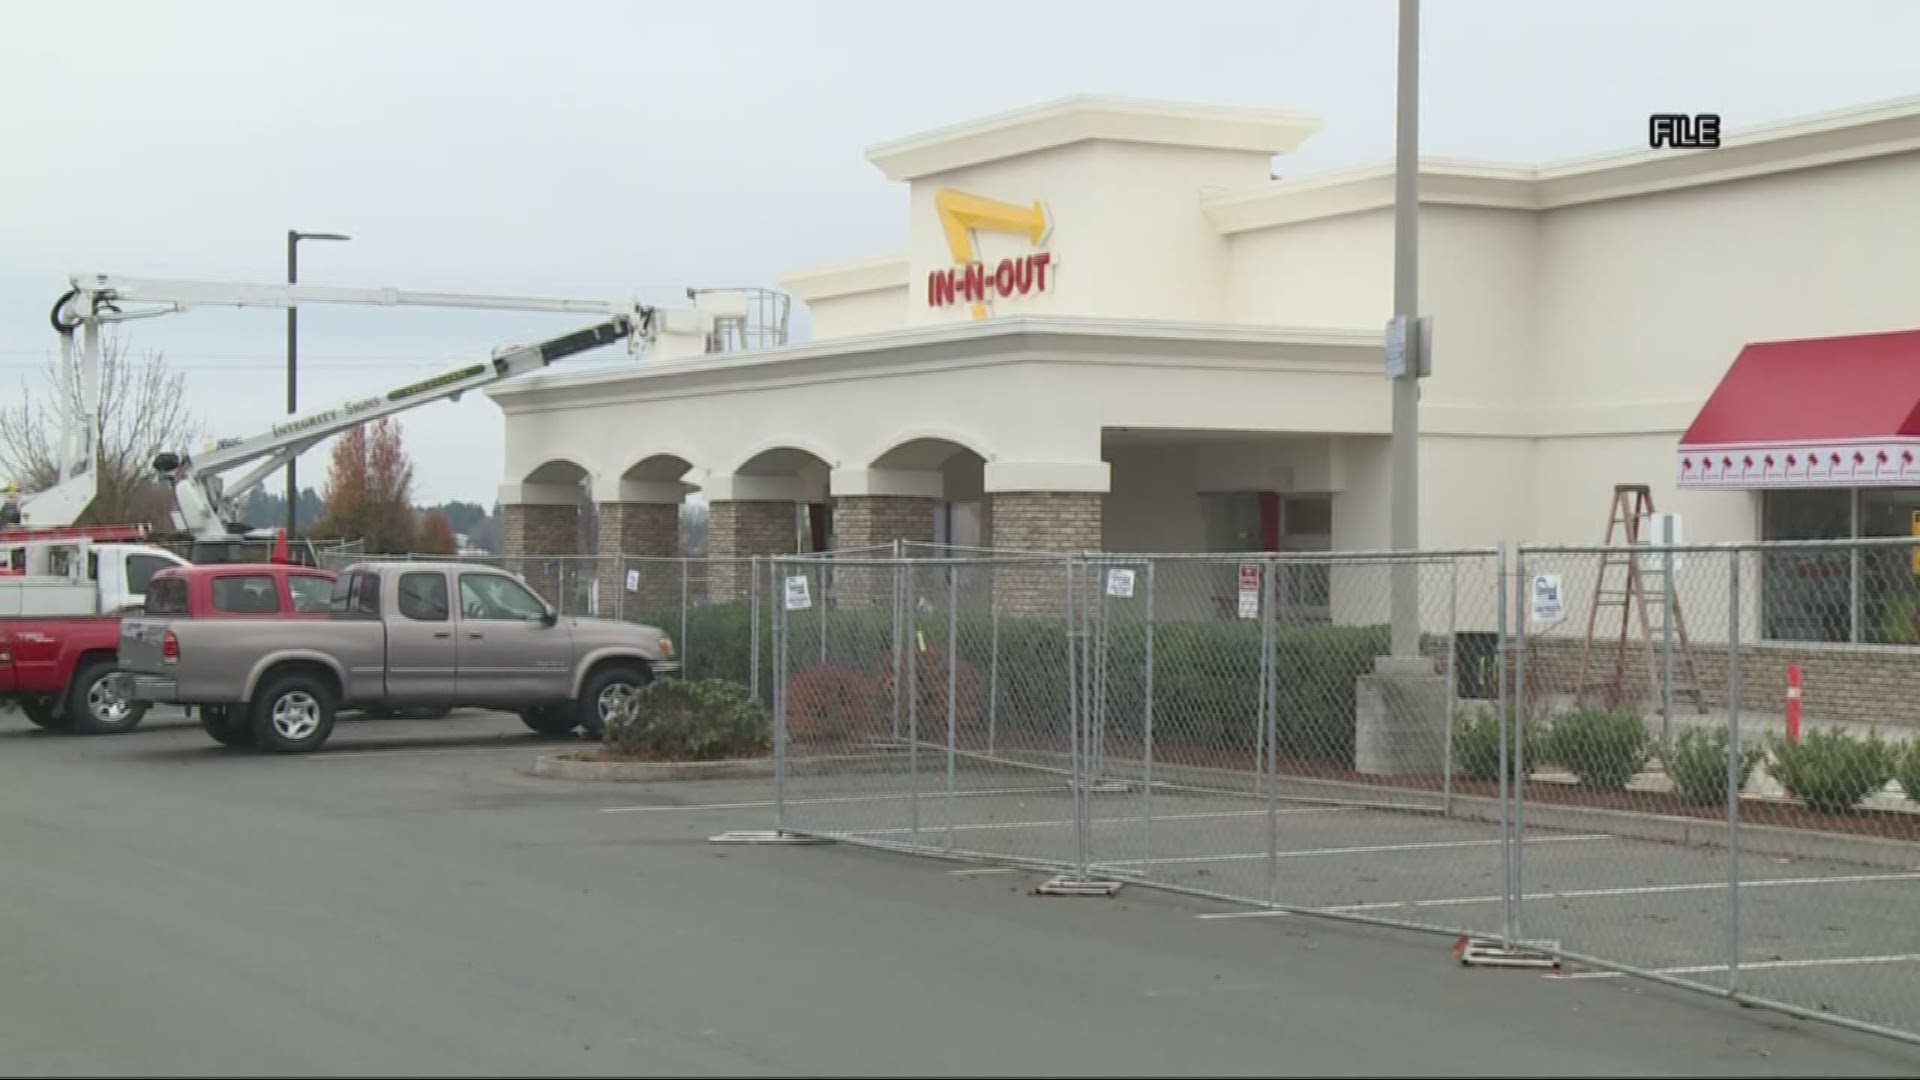 In-N-Out to open Thursday in Keizer.